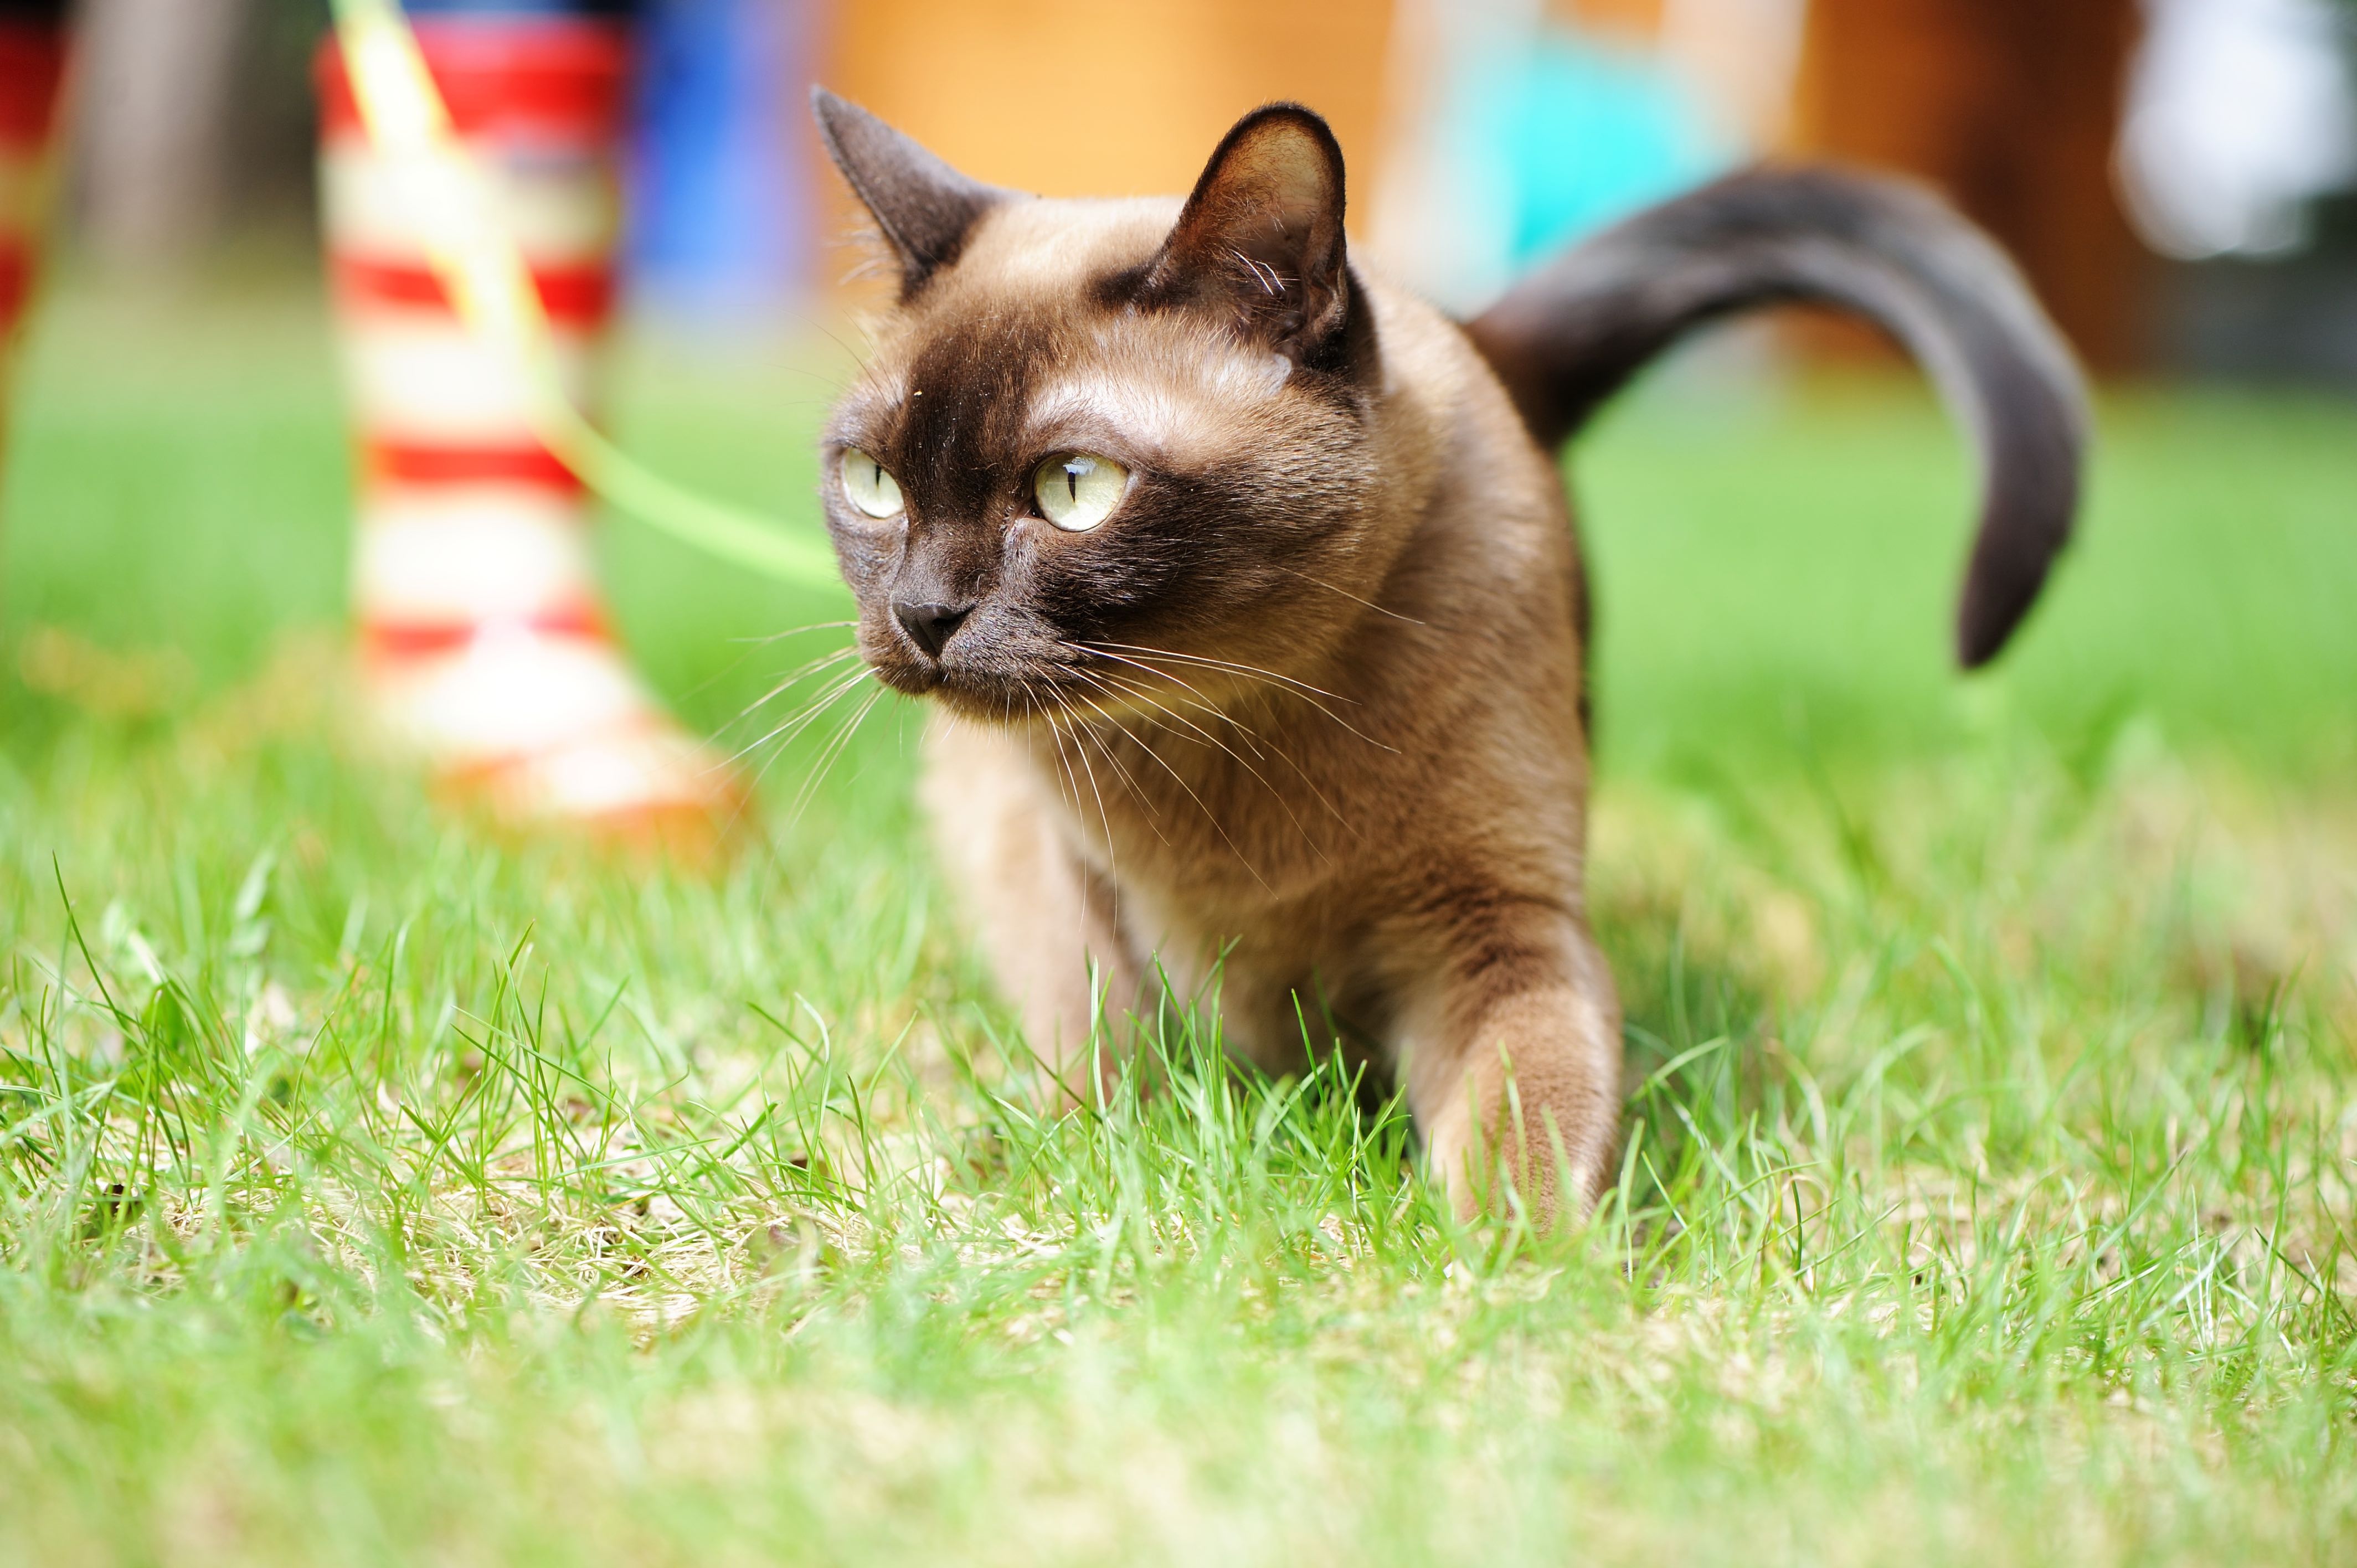 burmese cat walking on a leash and harness outside